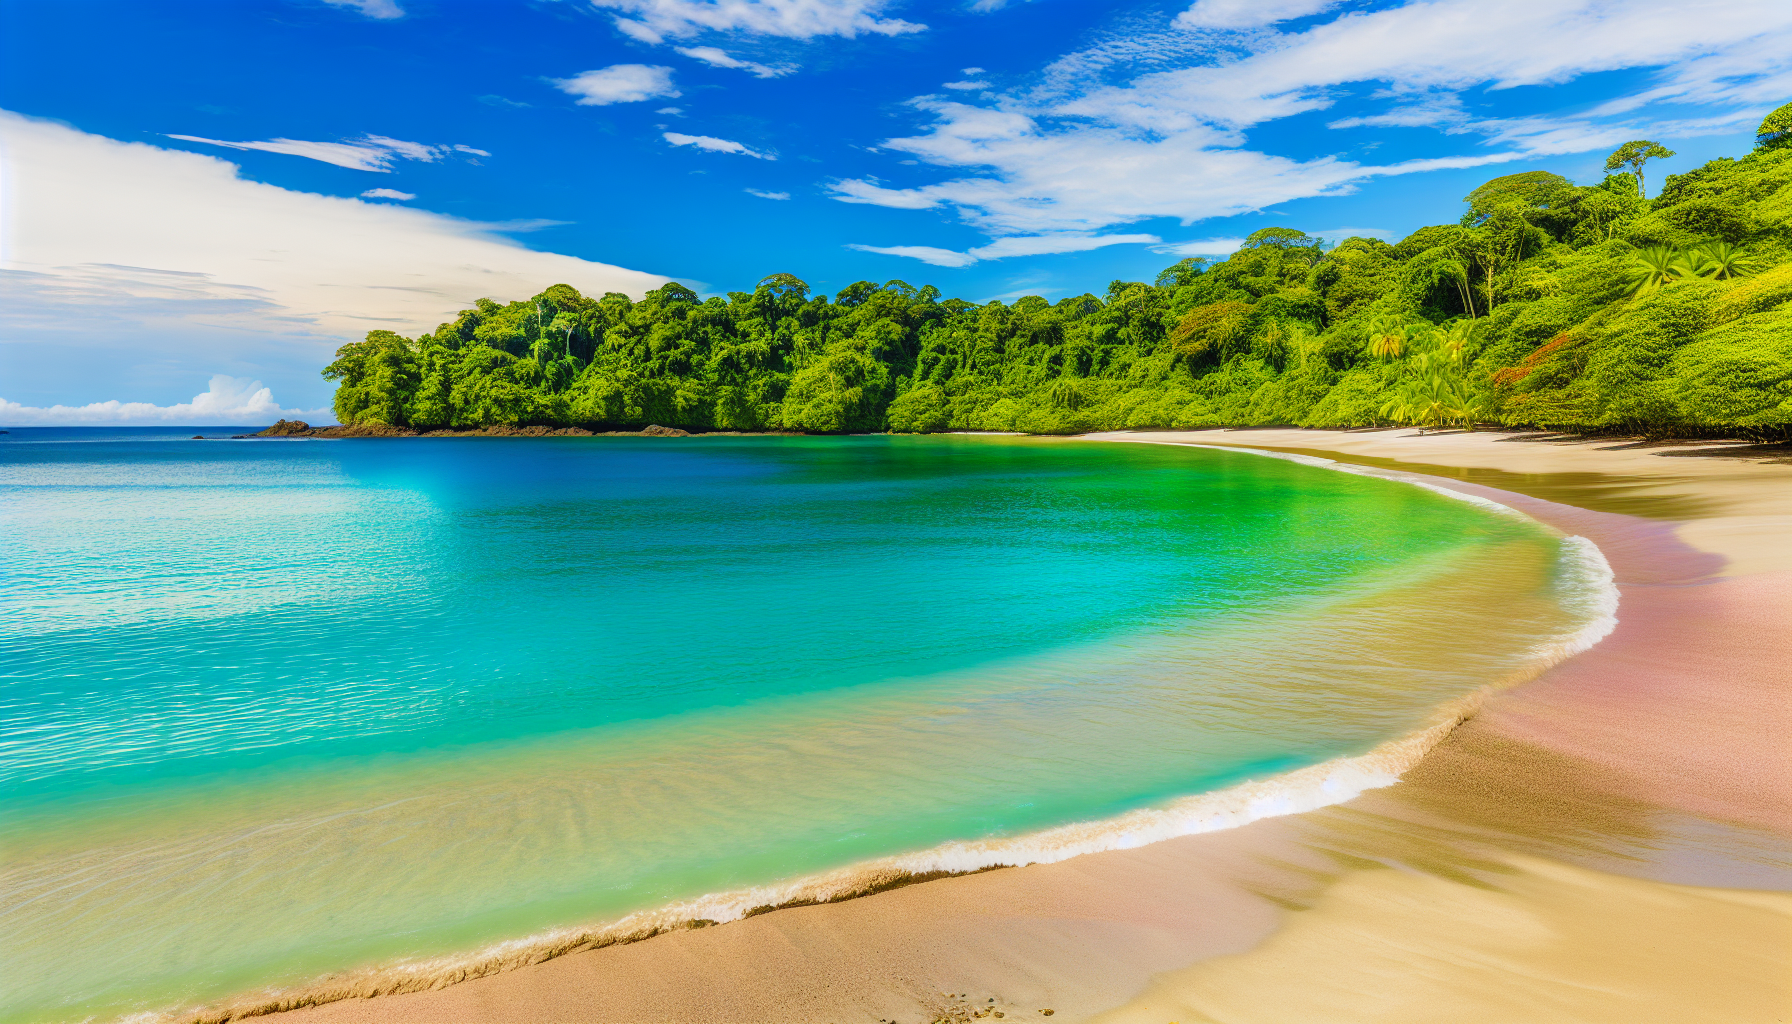 Crystal clear waters and lush greenery at Manuel Antonio National Park